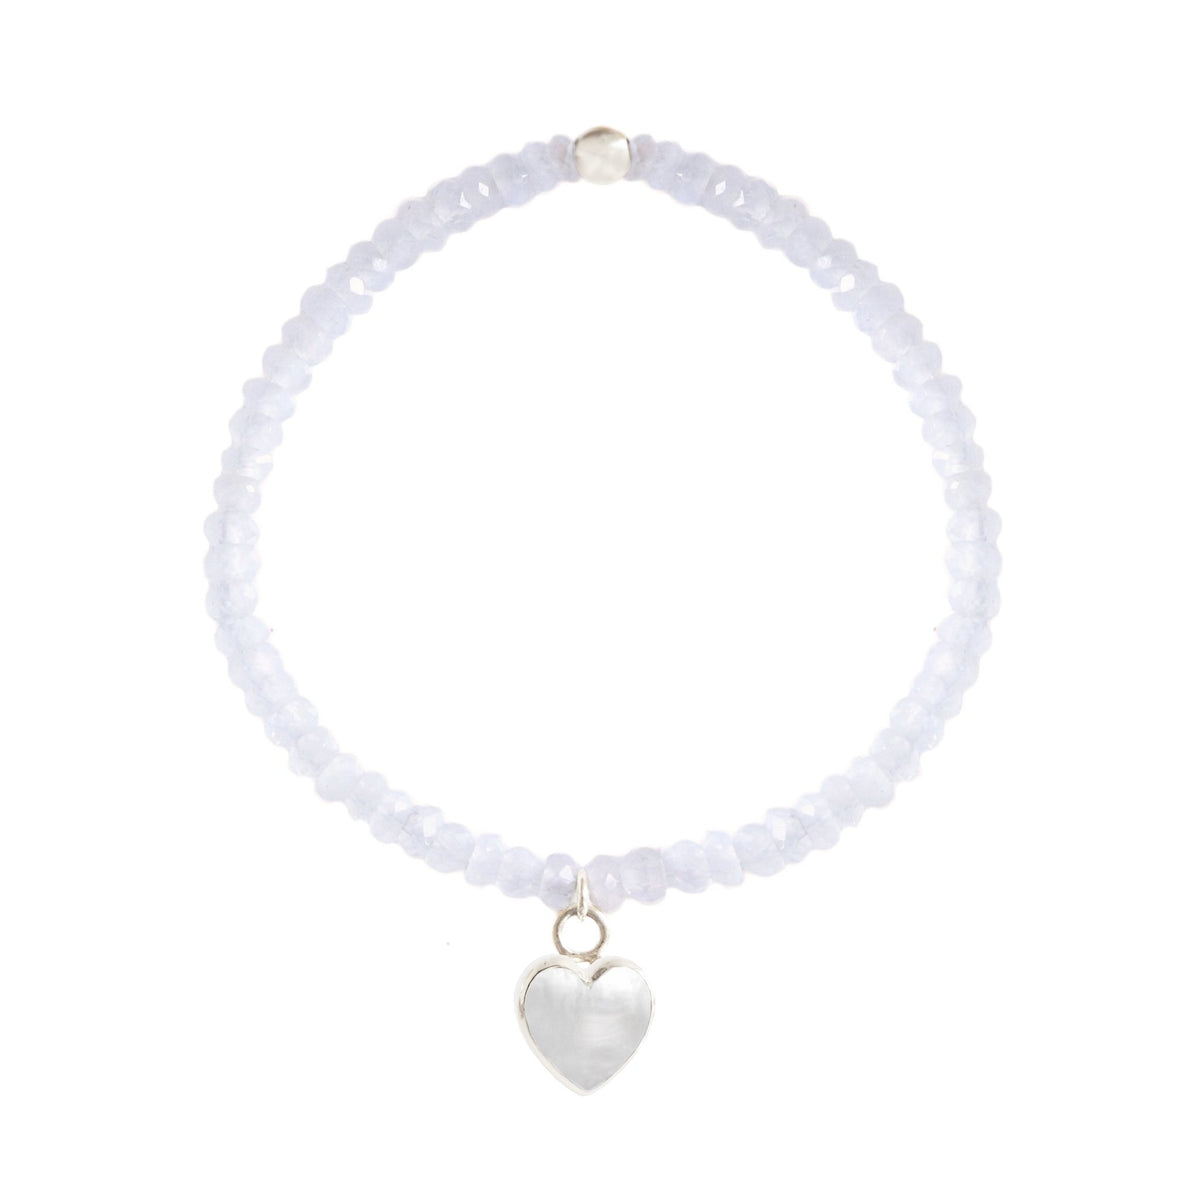 FRAICHE INSPIRE SWEETHEART STRETCH BRACELET - MOONSTONE, MOTHER OF PEARL &amp; SILVER - SO PRETTY CARA COTTER